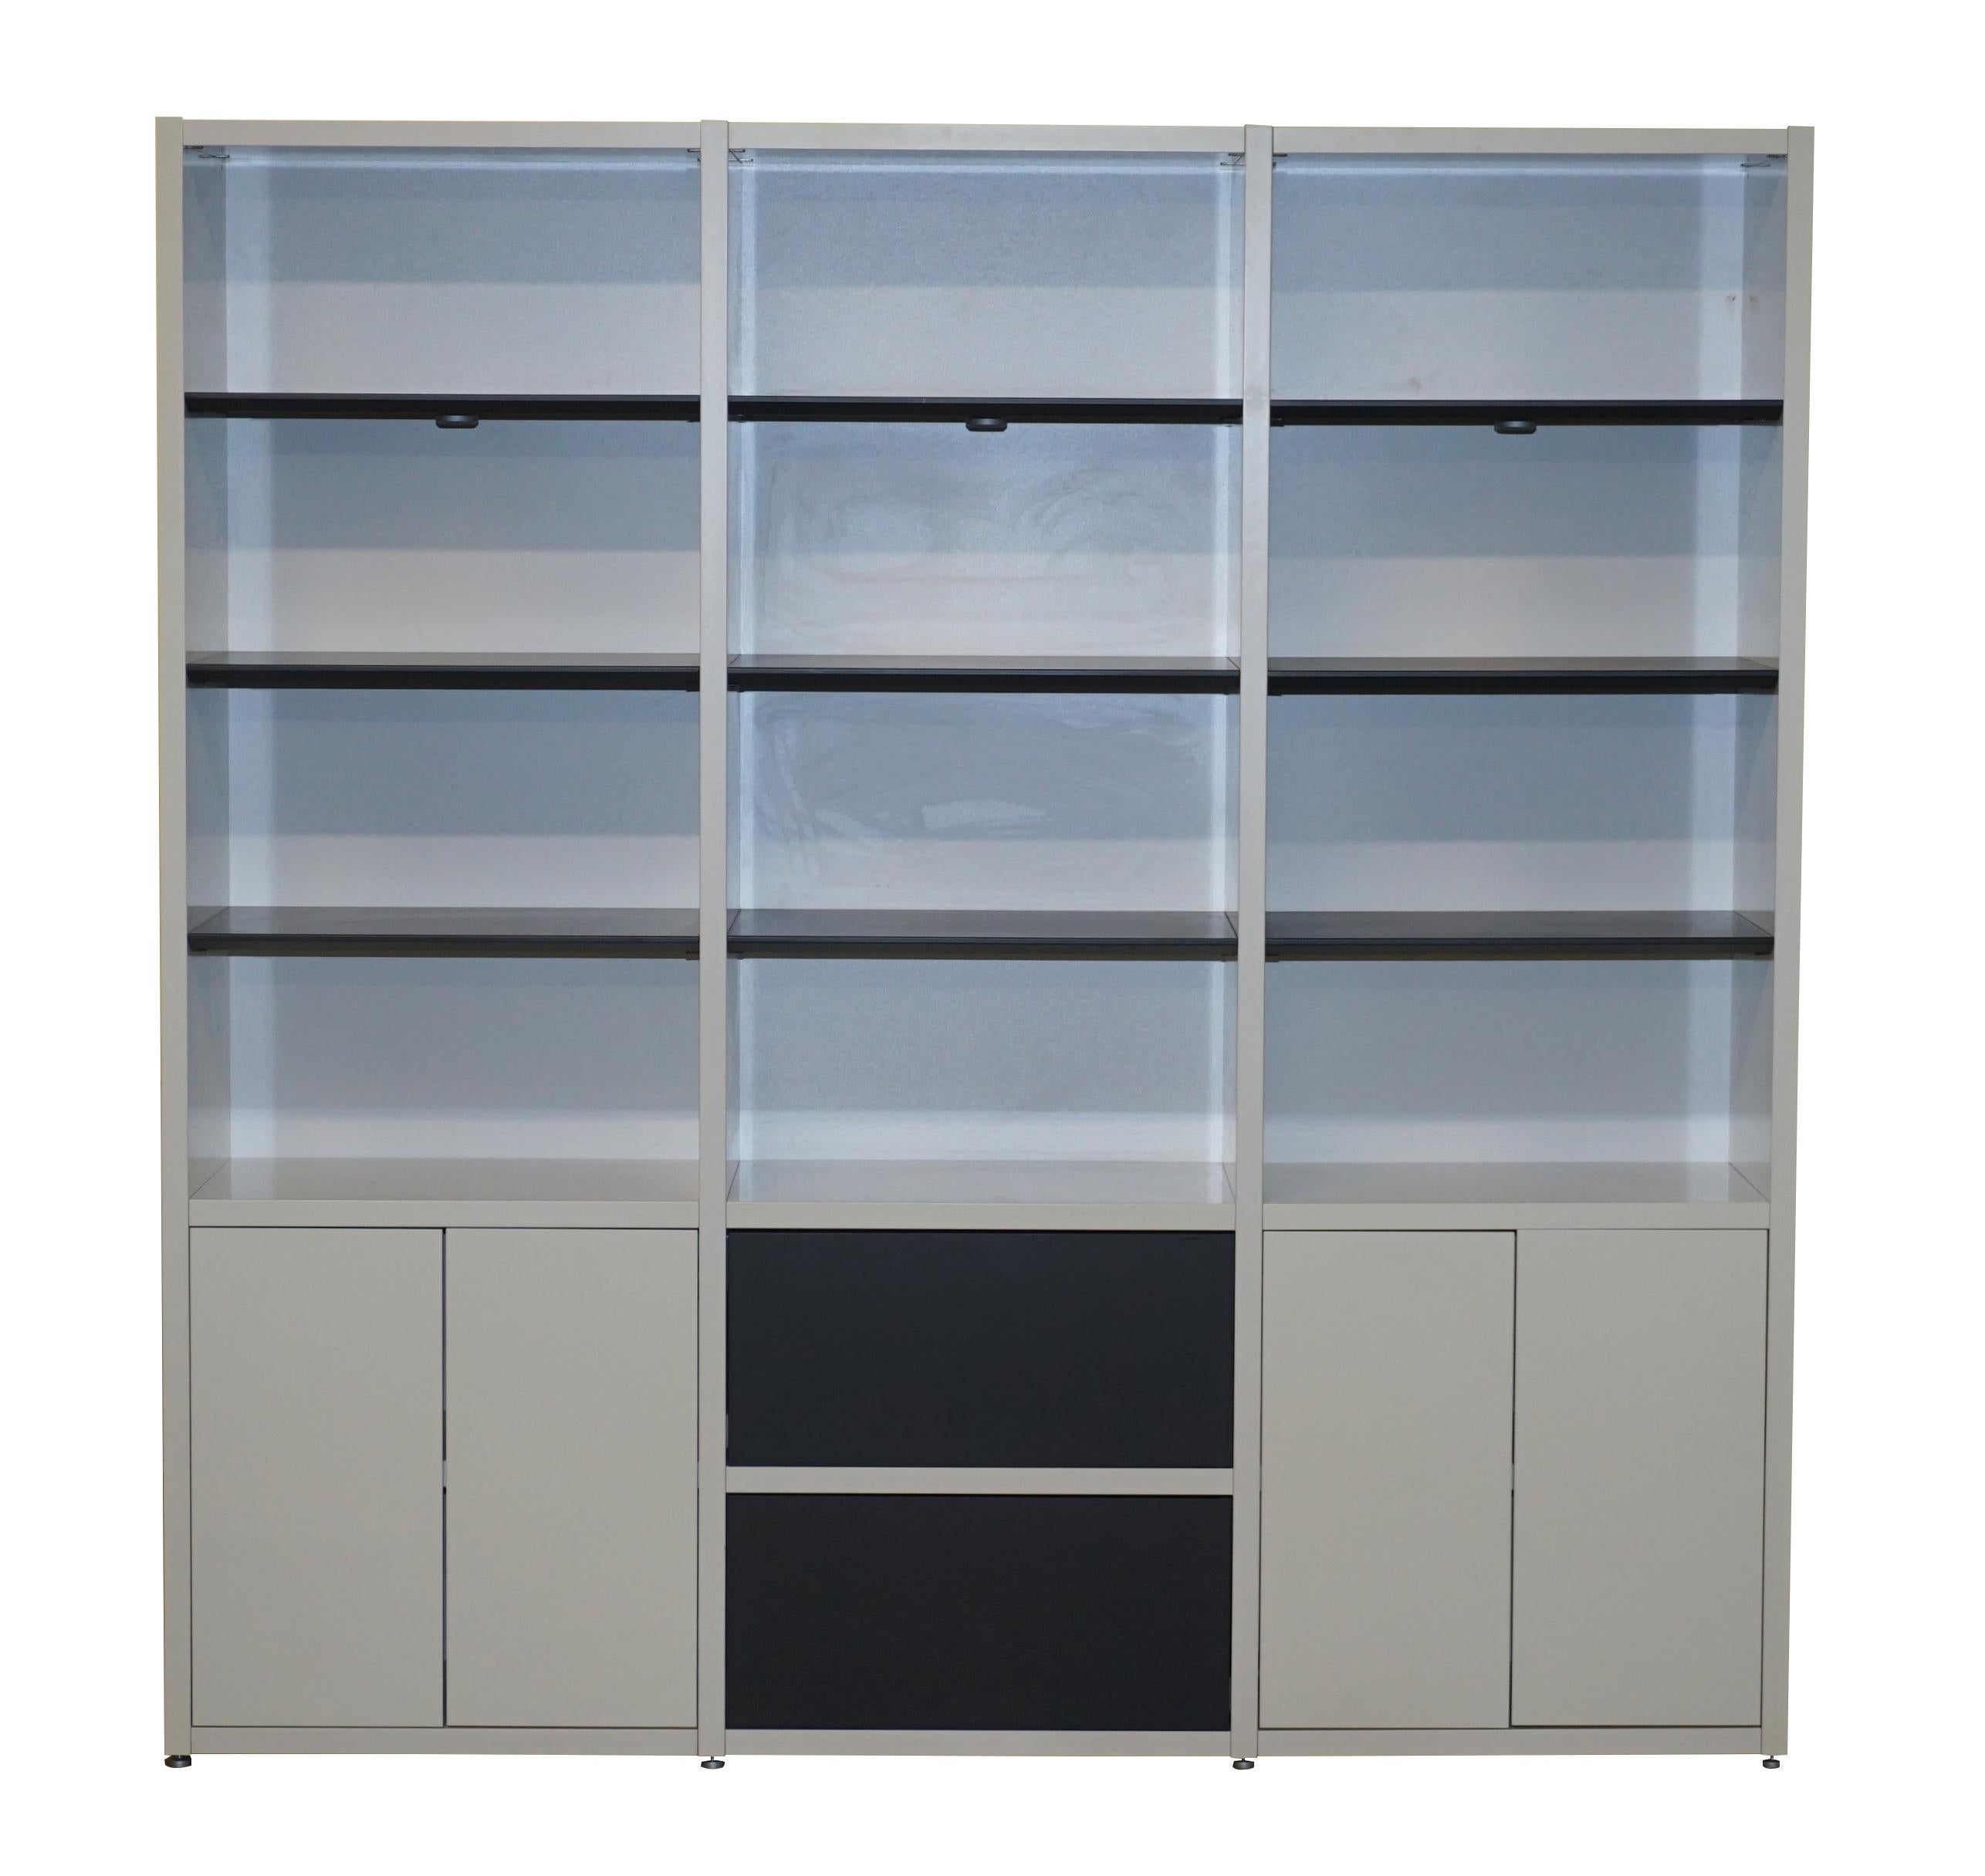 We are delighted to offer for sale this stunning Bo Concepts Copenhagen wall unit bookcase RRP £7000

A very well made piece that offers huge amounts of storage, this unit has 14 shelves and 2 drawers, there are three built in lights which offer a